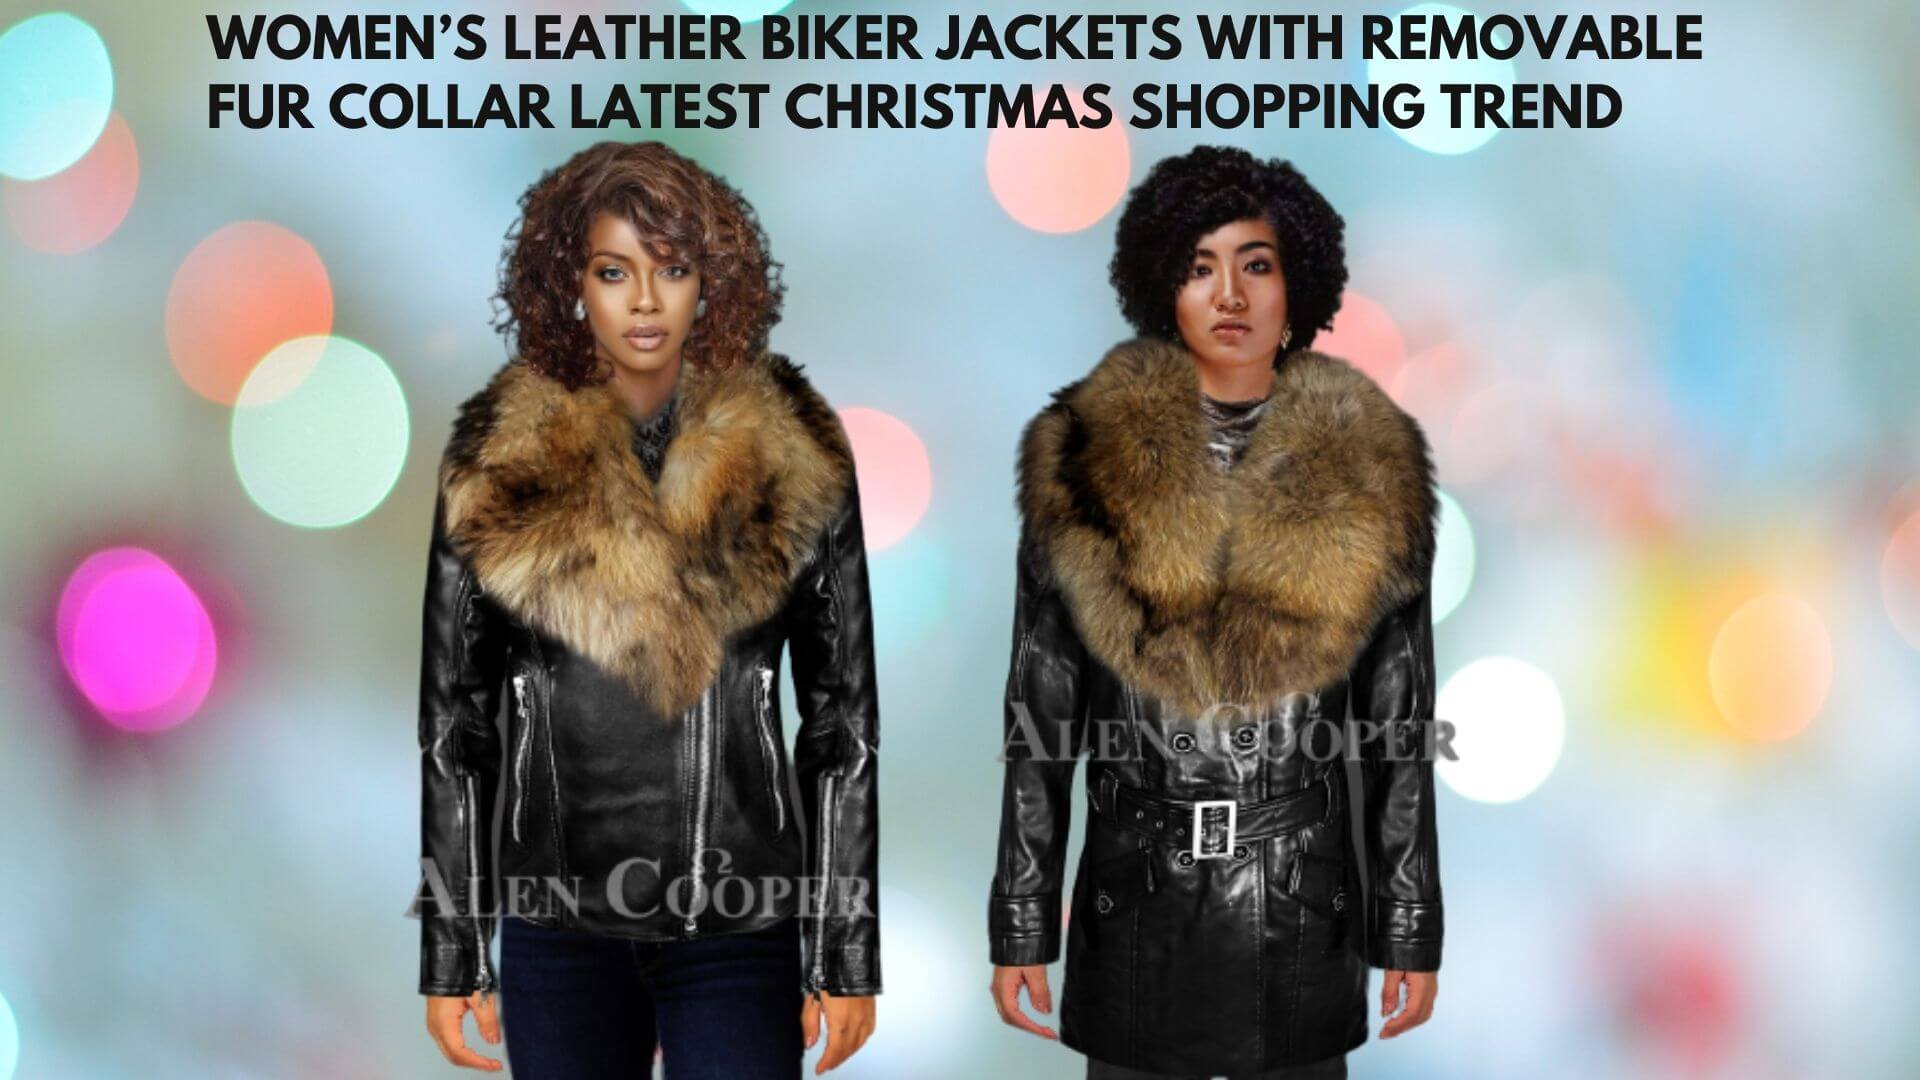 WOMENS LEATHER BIKER JACKETS WITH REMOVABLE FUR COLLAR LATEST CHRISTMAS SHOPPING TREND